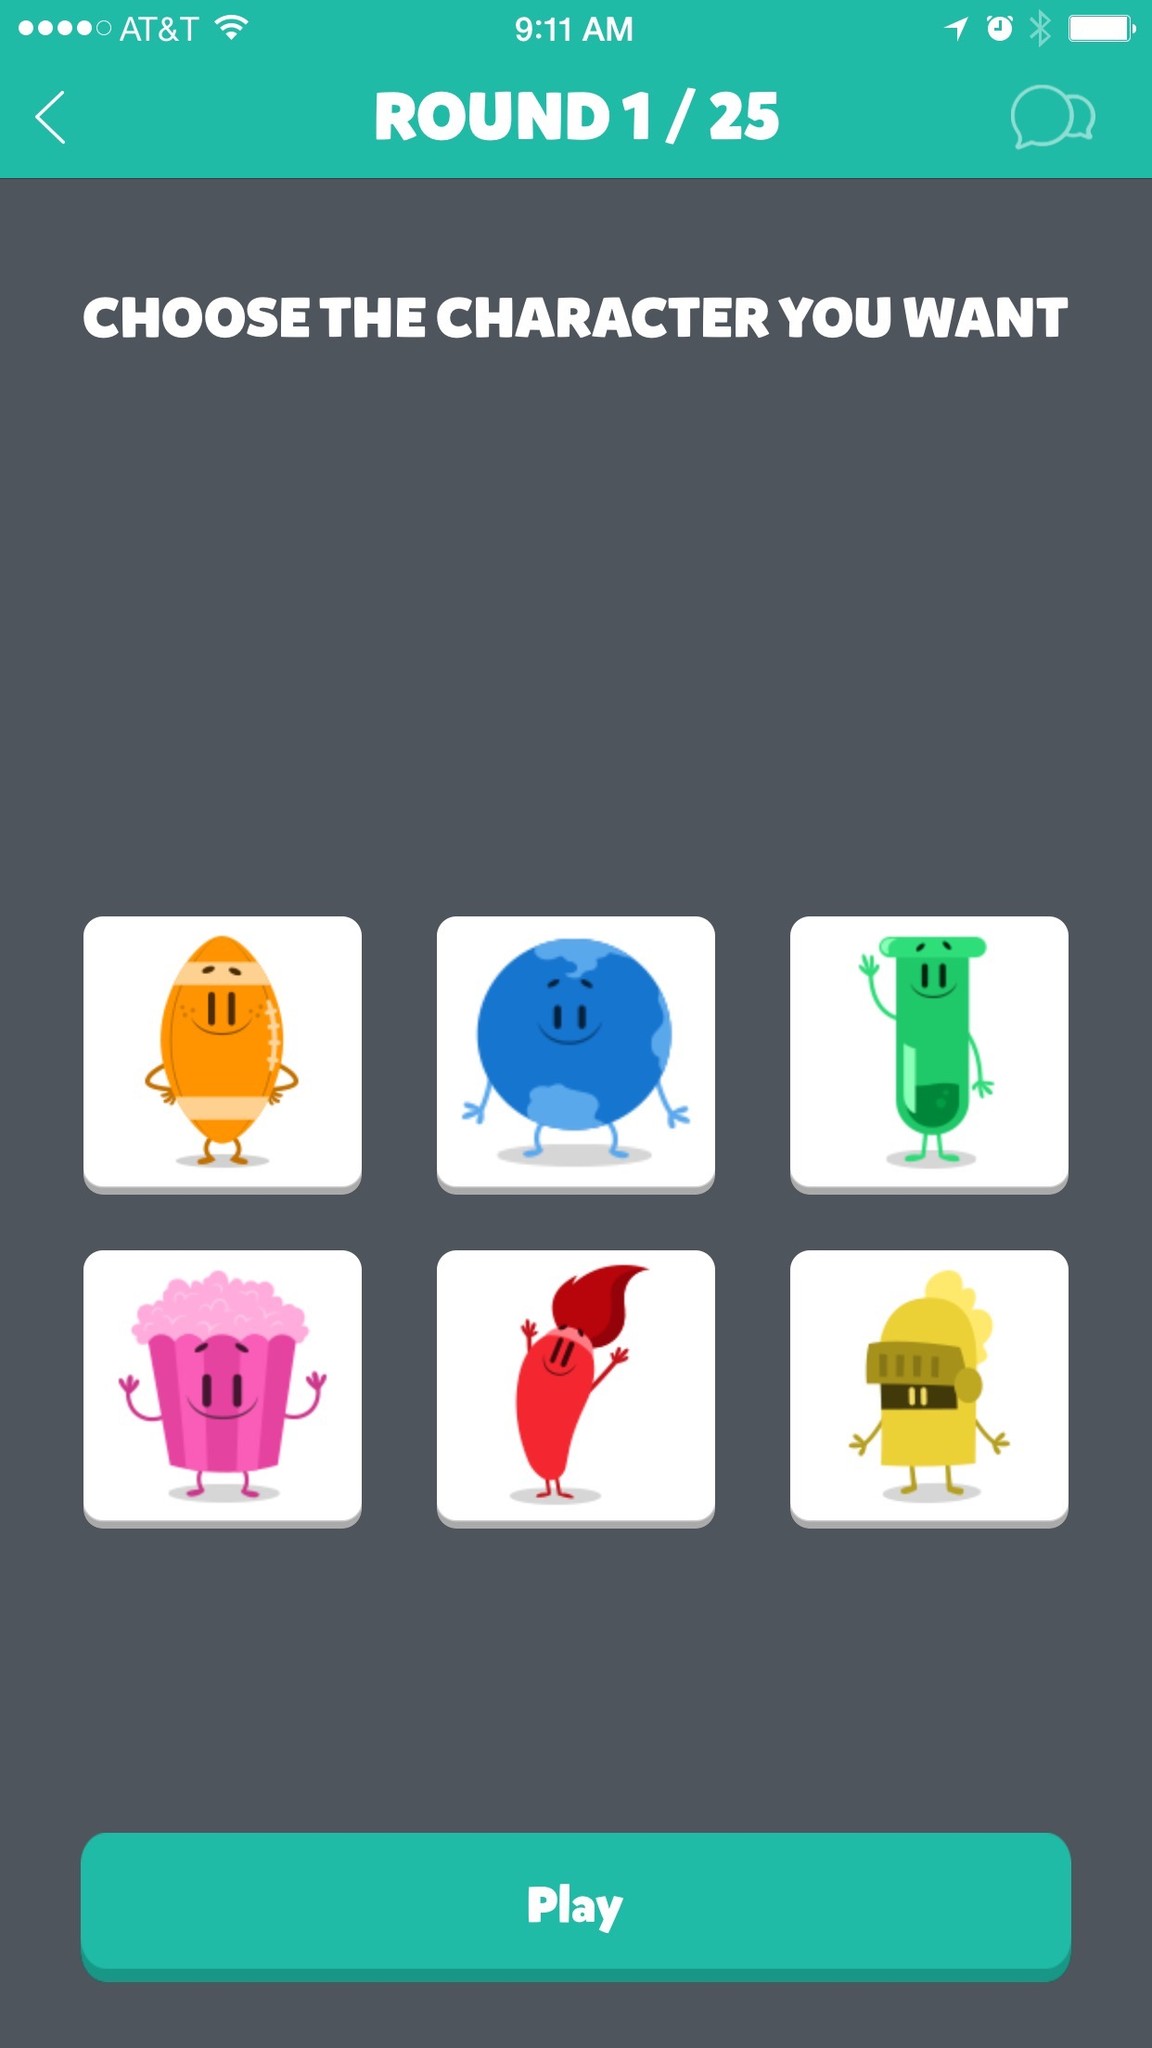 Trivia Crack: Top tips, hints, and cheats you need to know!